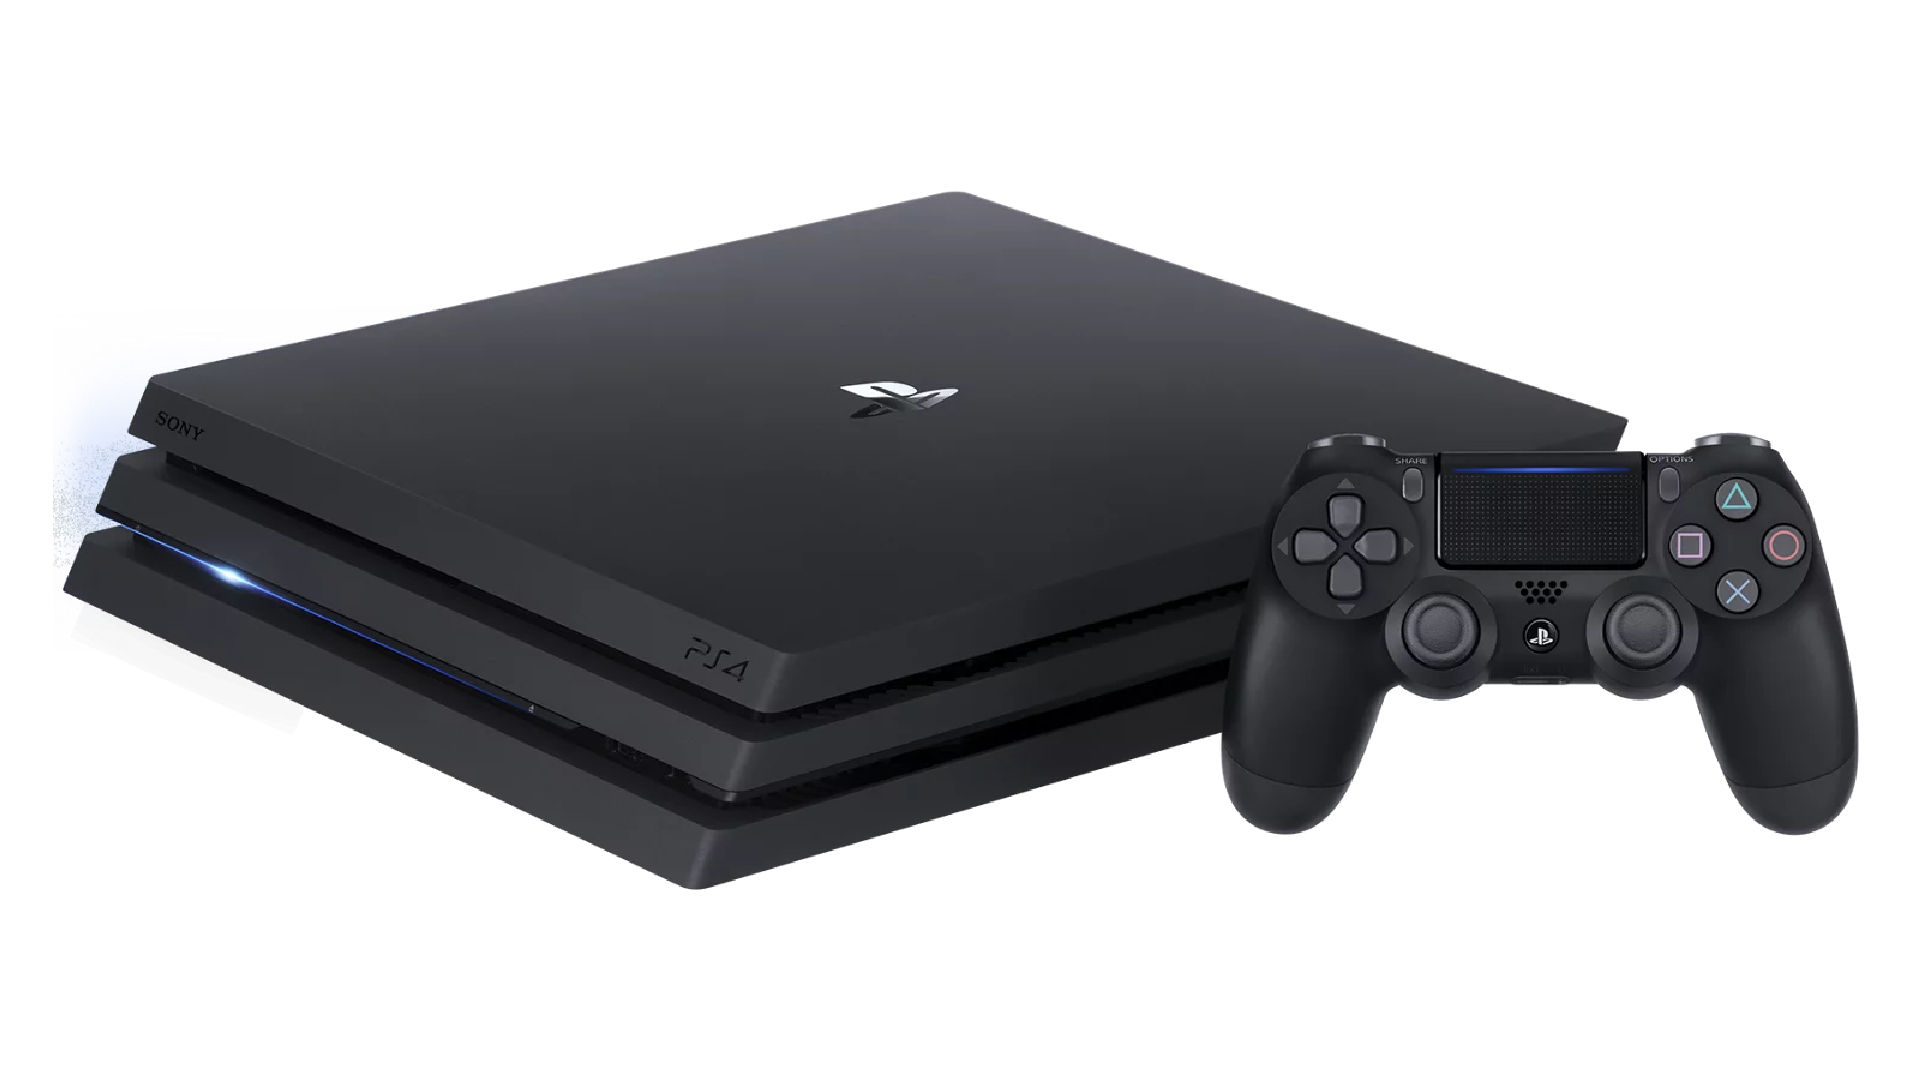 Sony PS5 Slim, PS5 Pro, and handheld console are coming soon